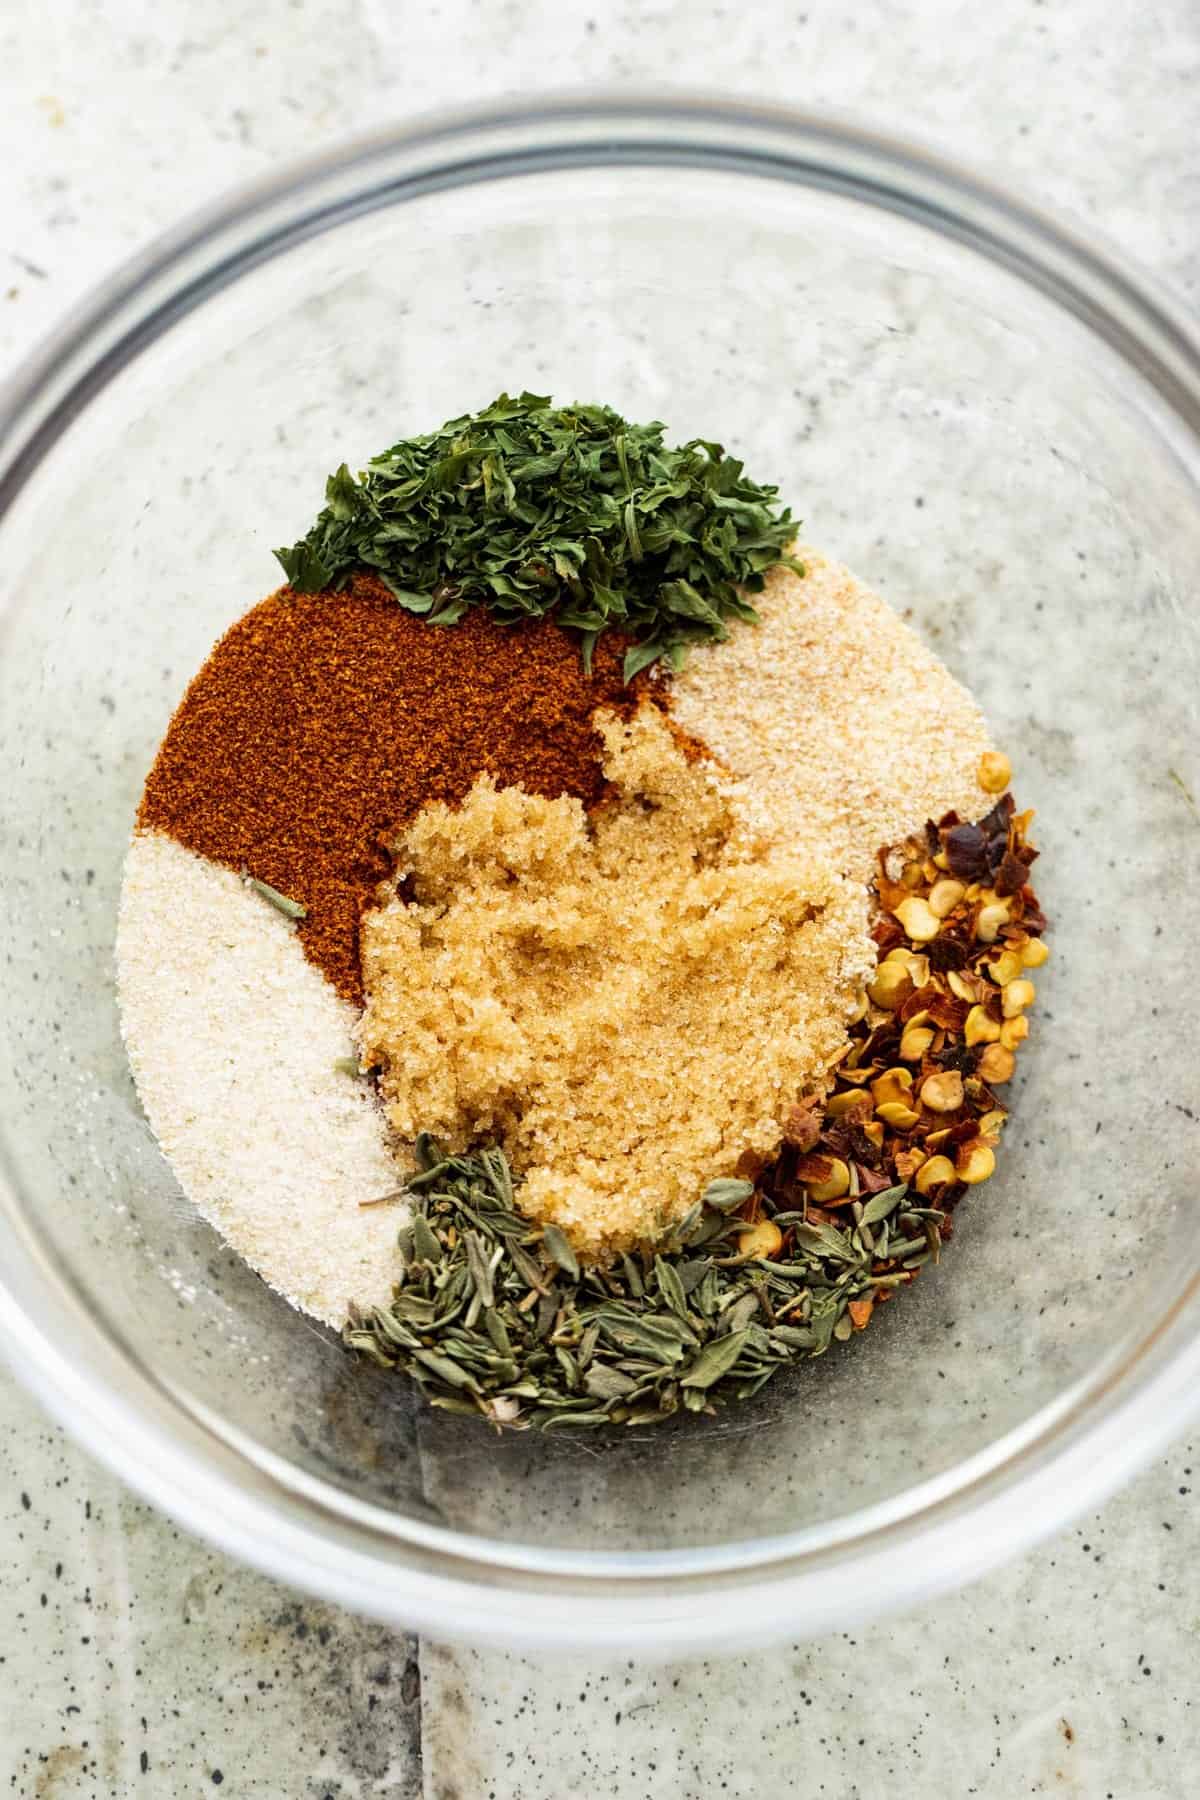 seasonings and herbs arranged in a small mixing bowl.